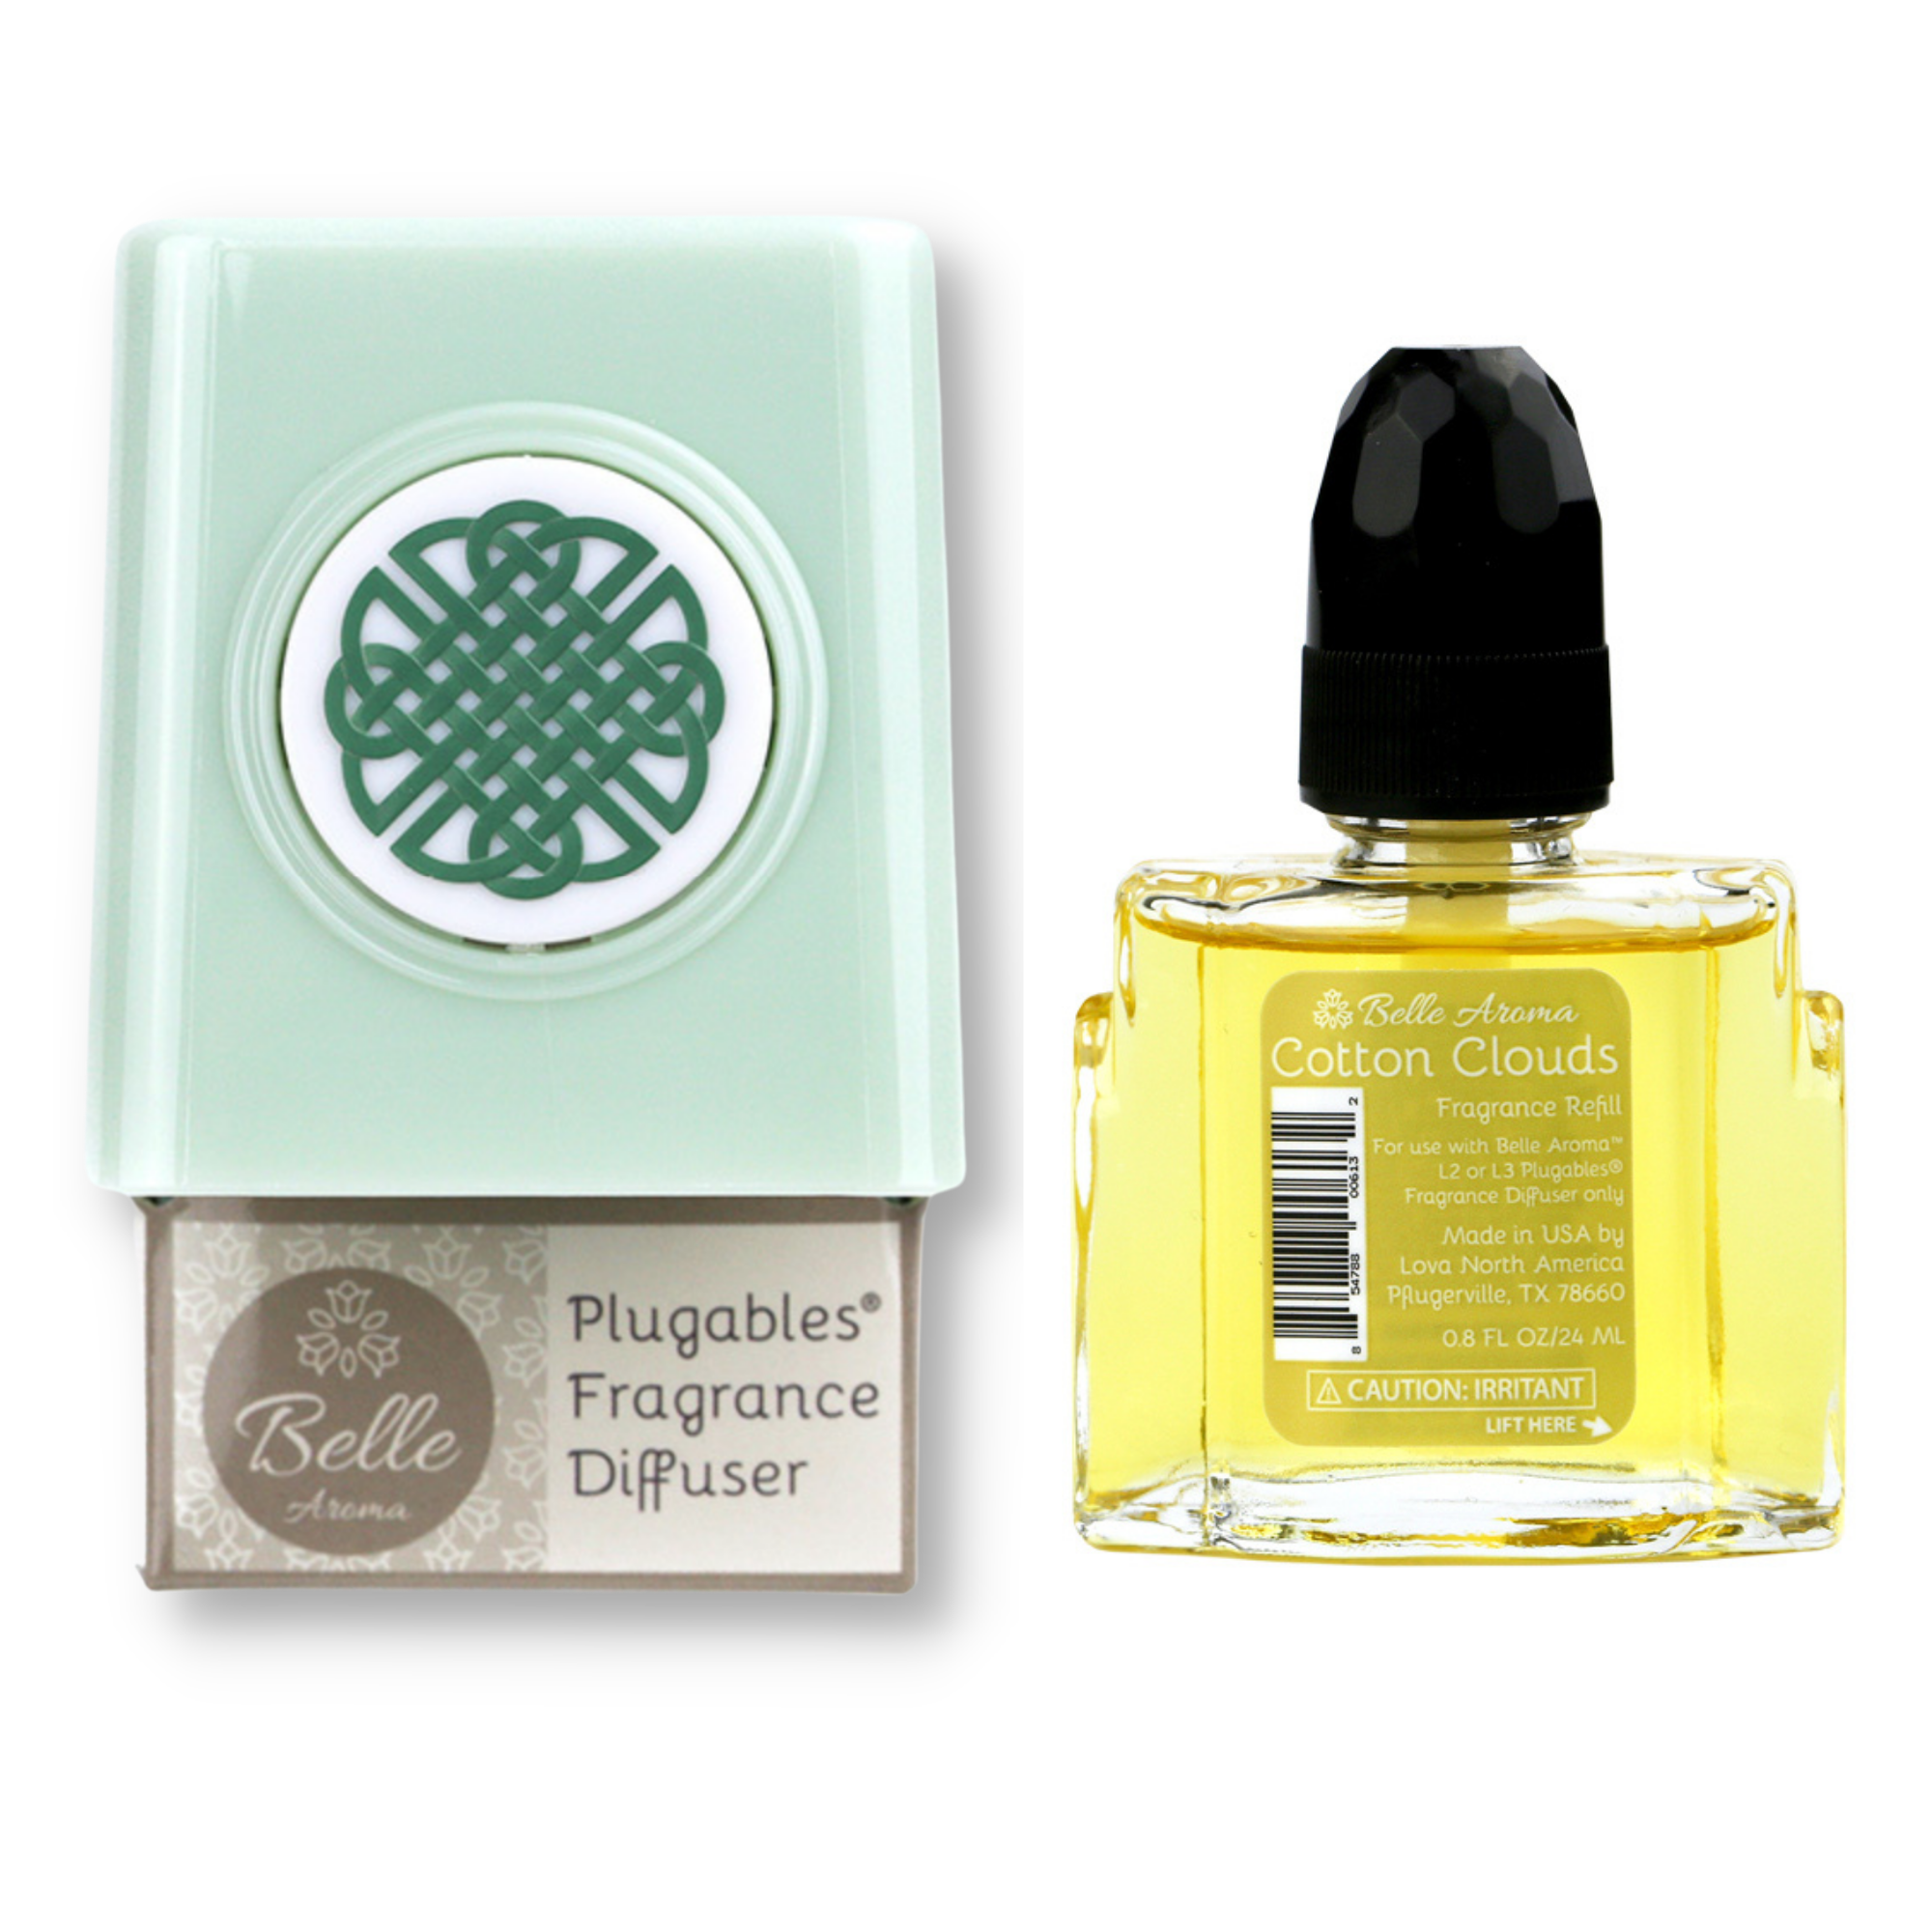 Celtic Knot Medallion Plugables® Plugin Electric Scented Oil Diffuser - Sea Glass with Cotton Clouds Fragrance Oil Home Fragrance Accessories